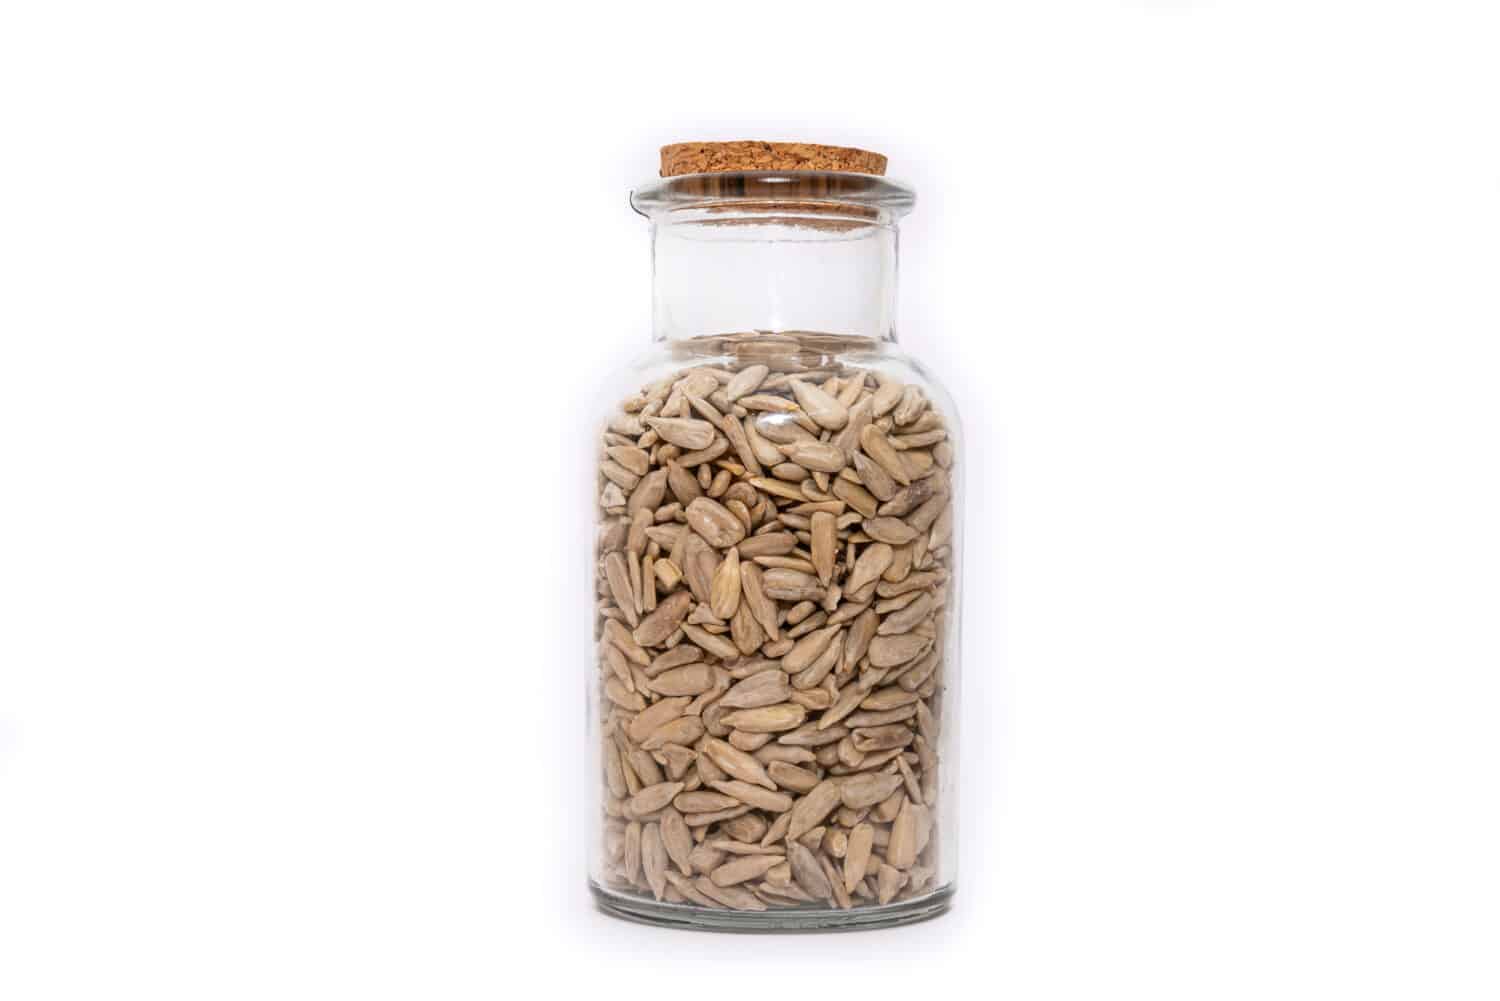 A Jar of dried Sunflower seed isolated on a white background, nutritious seeds dried and stored. Healthy food choice.